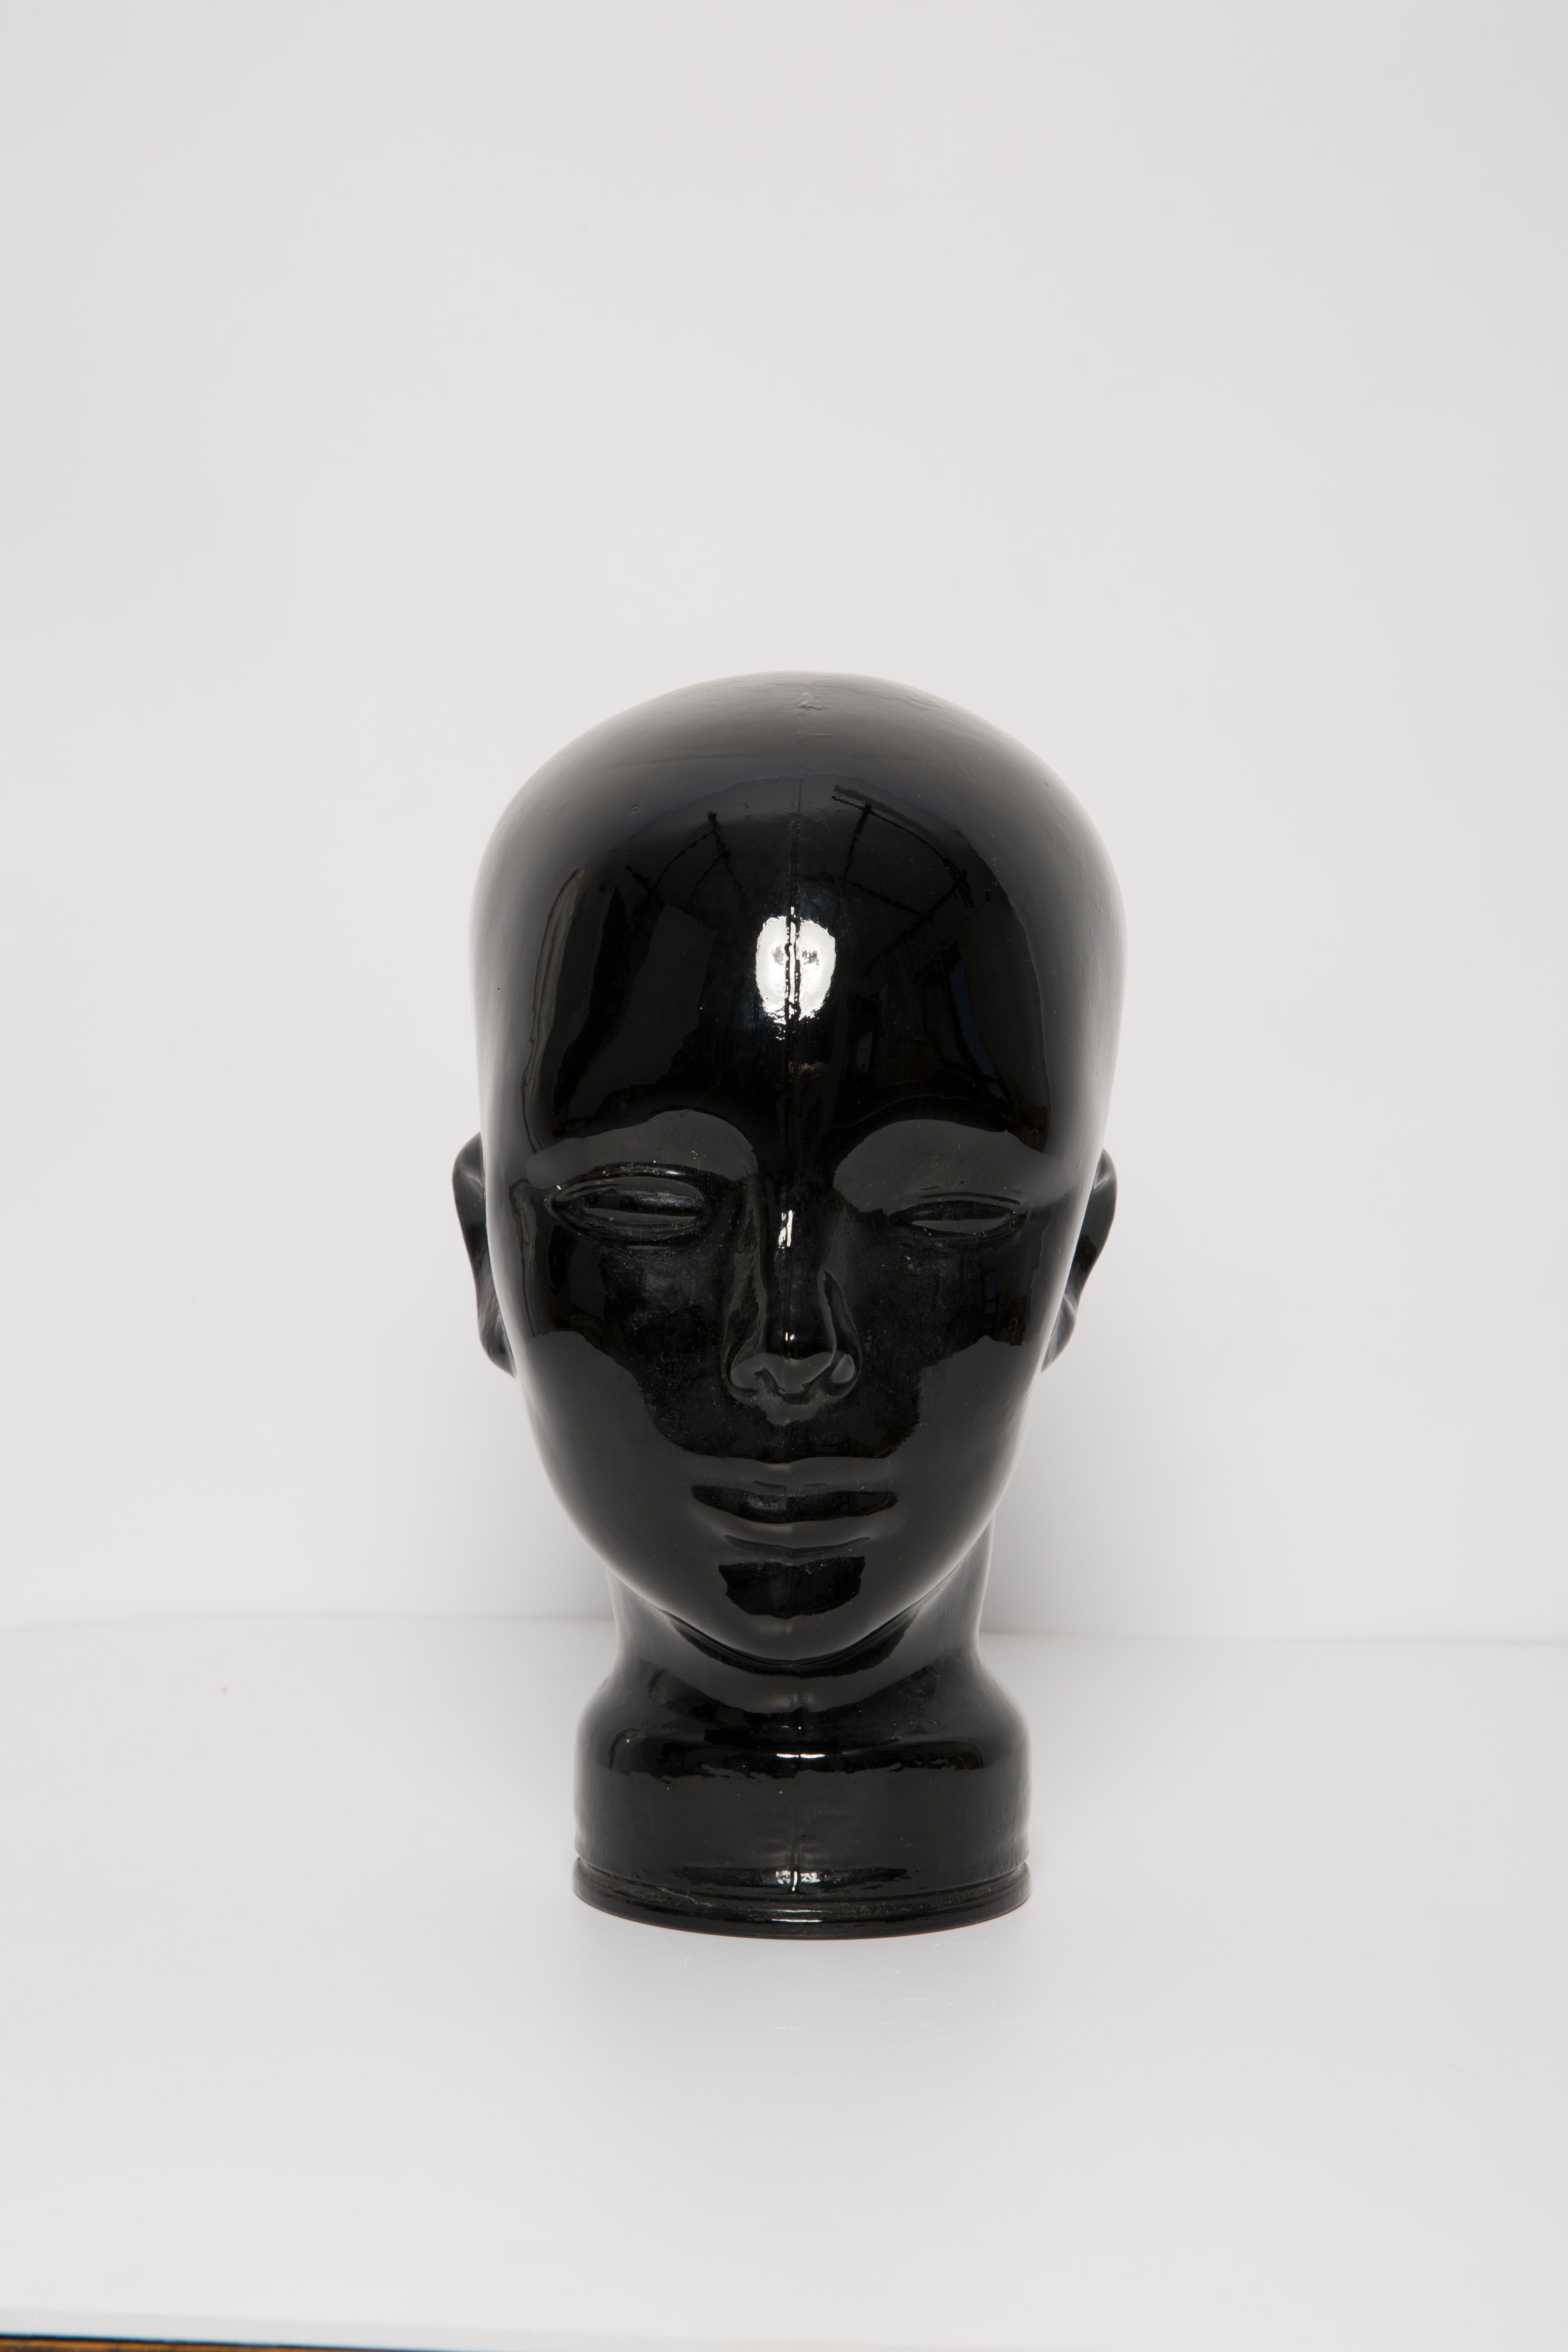 Life-size glass head in a deep black beautiful color. Produced in a German glassworks in the 1970s. Perfect condition. A perfect addition to the interior, photo prop, display or headphone stand.